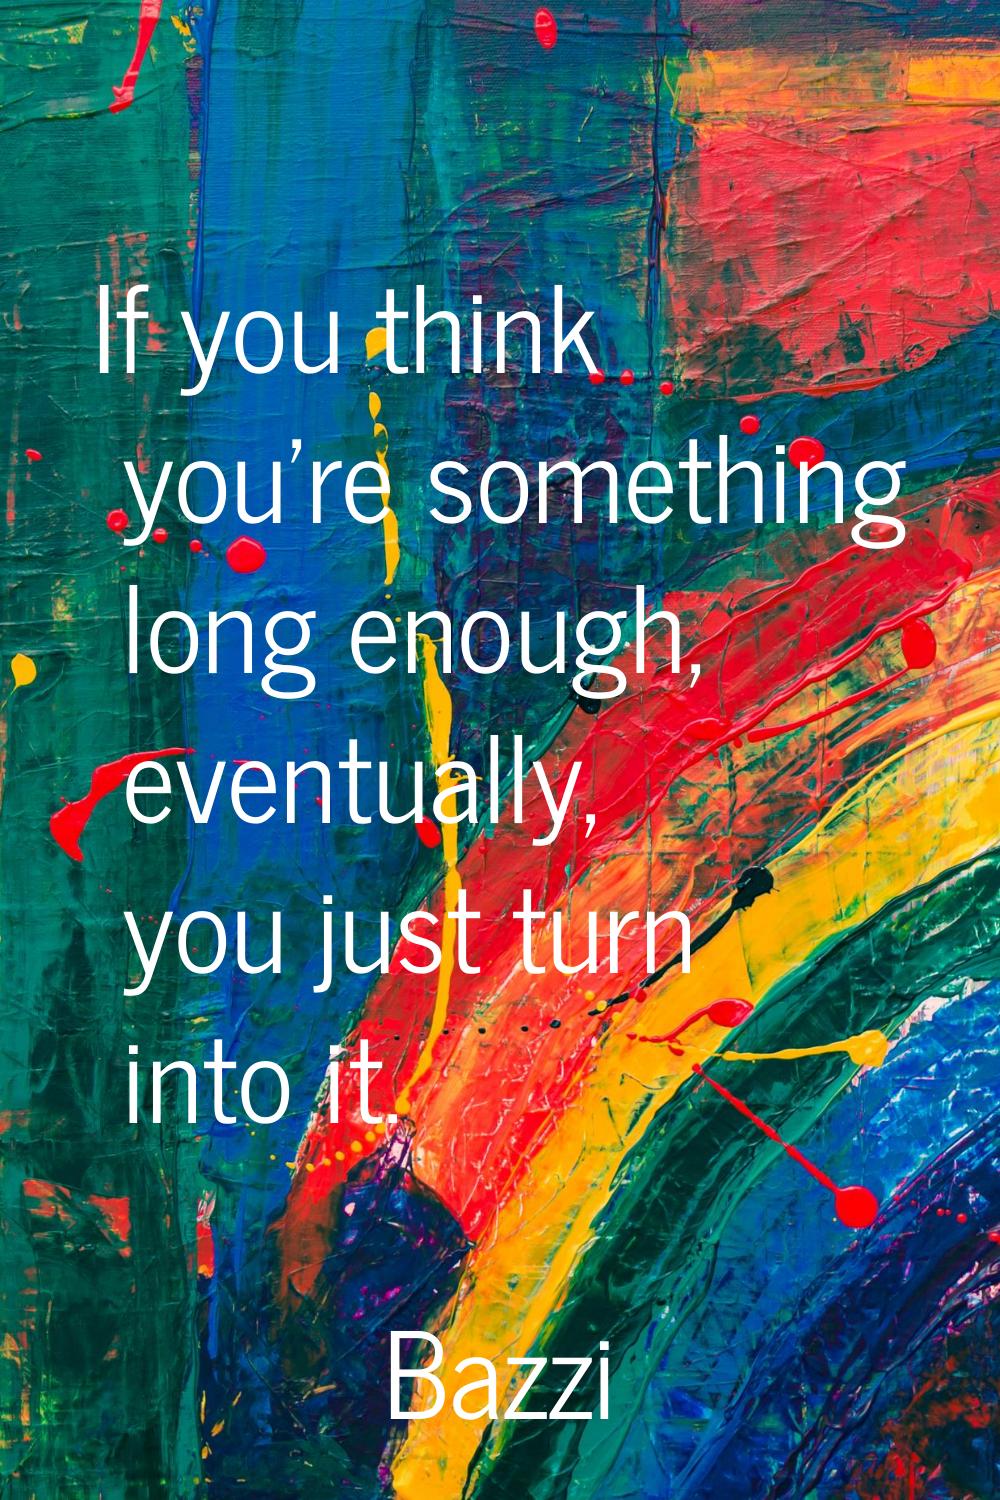 If you think you're something long enough, eventually, you just turn into it.